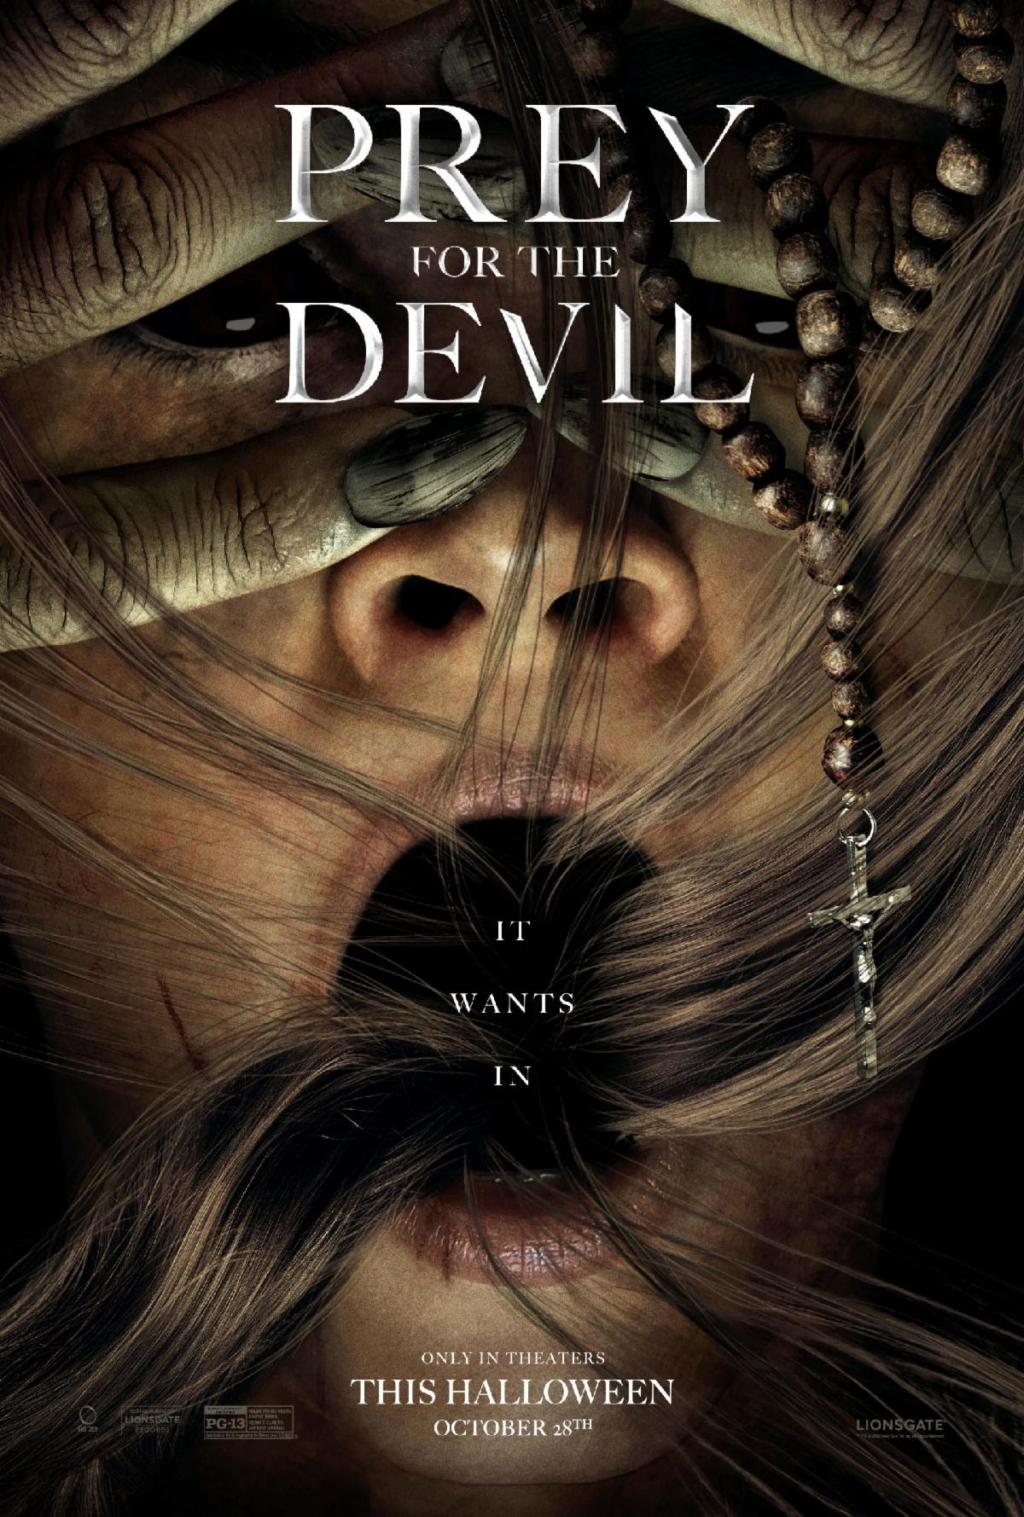 image 7 1024x1517 - 'Prey for the Devil' Trailer — Intense New Possession Horror Arrives This Halloween